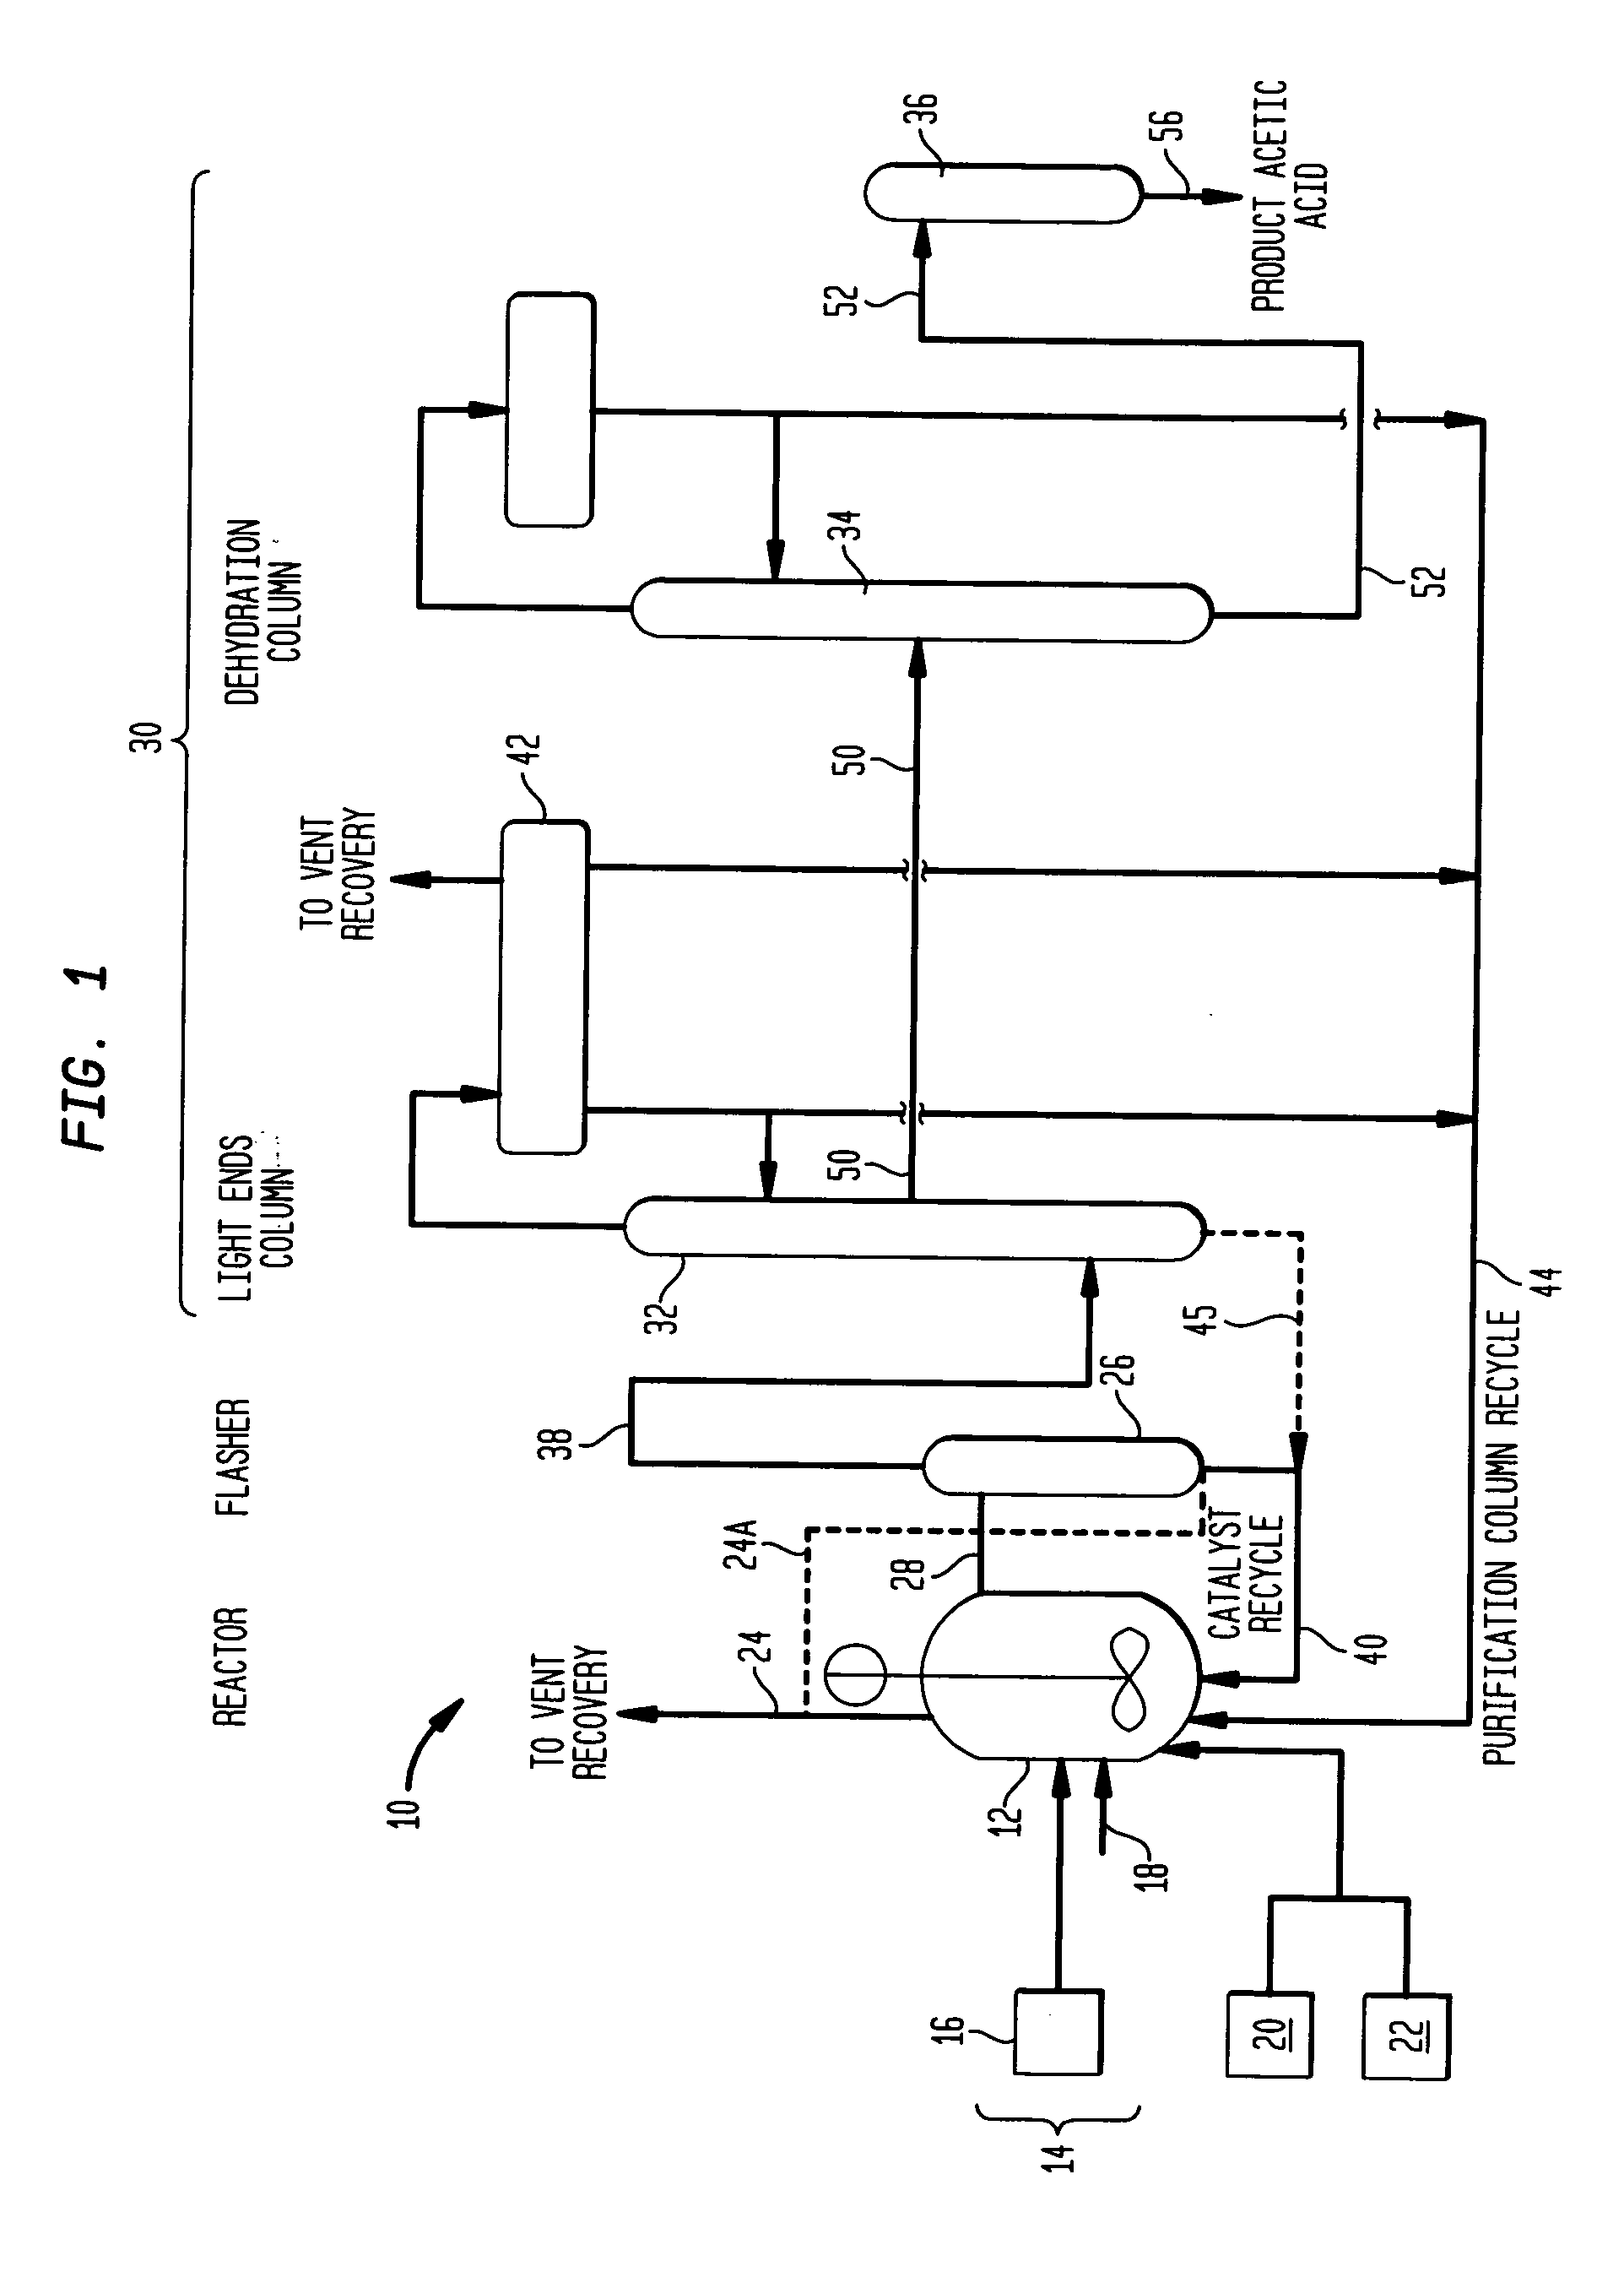 Method and apparatus for carbonylating methanol with acetic acid enriched flash stream